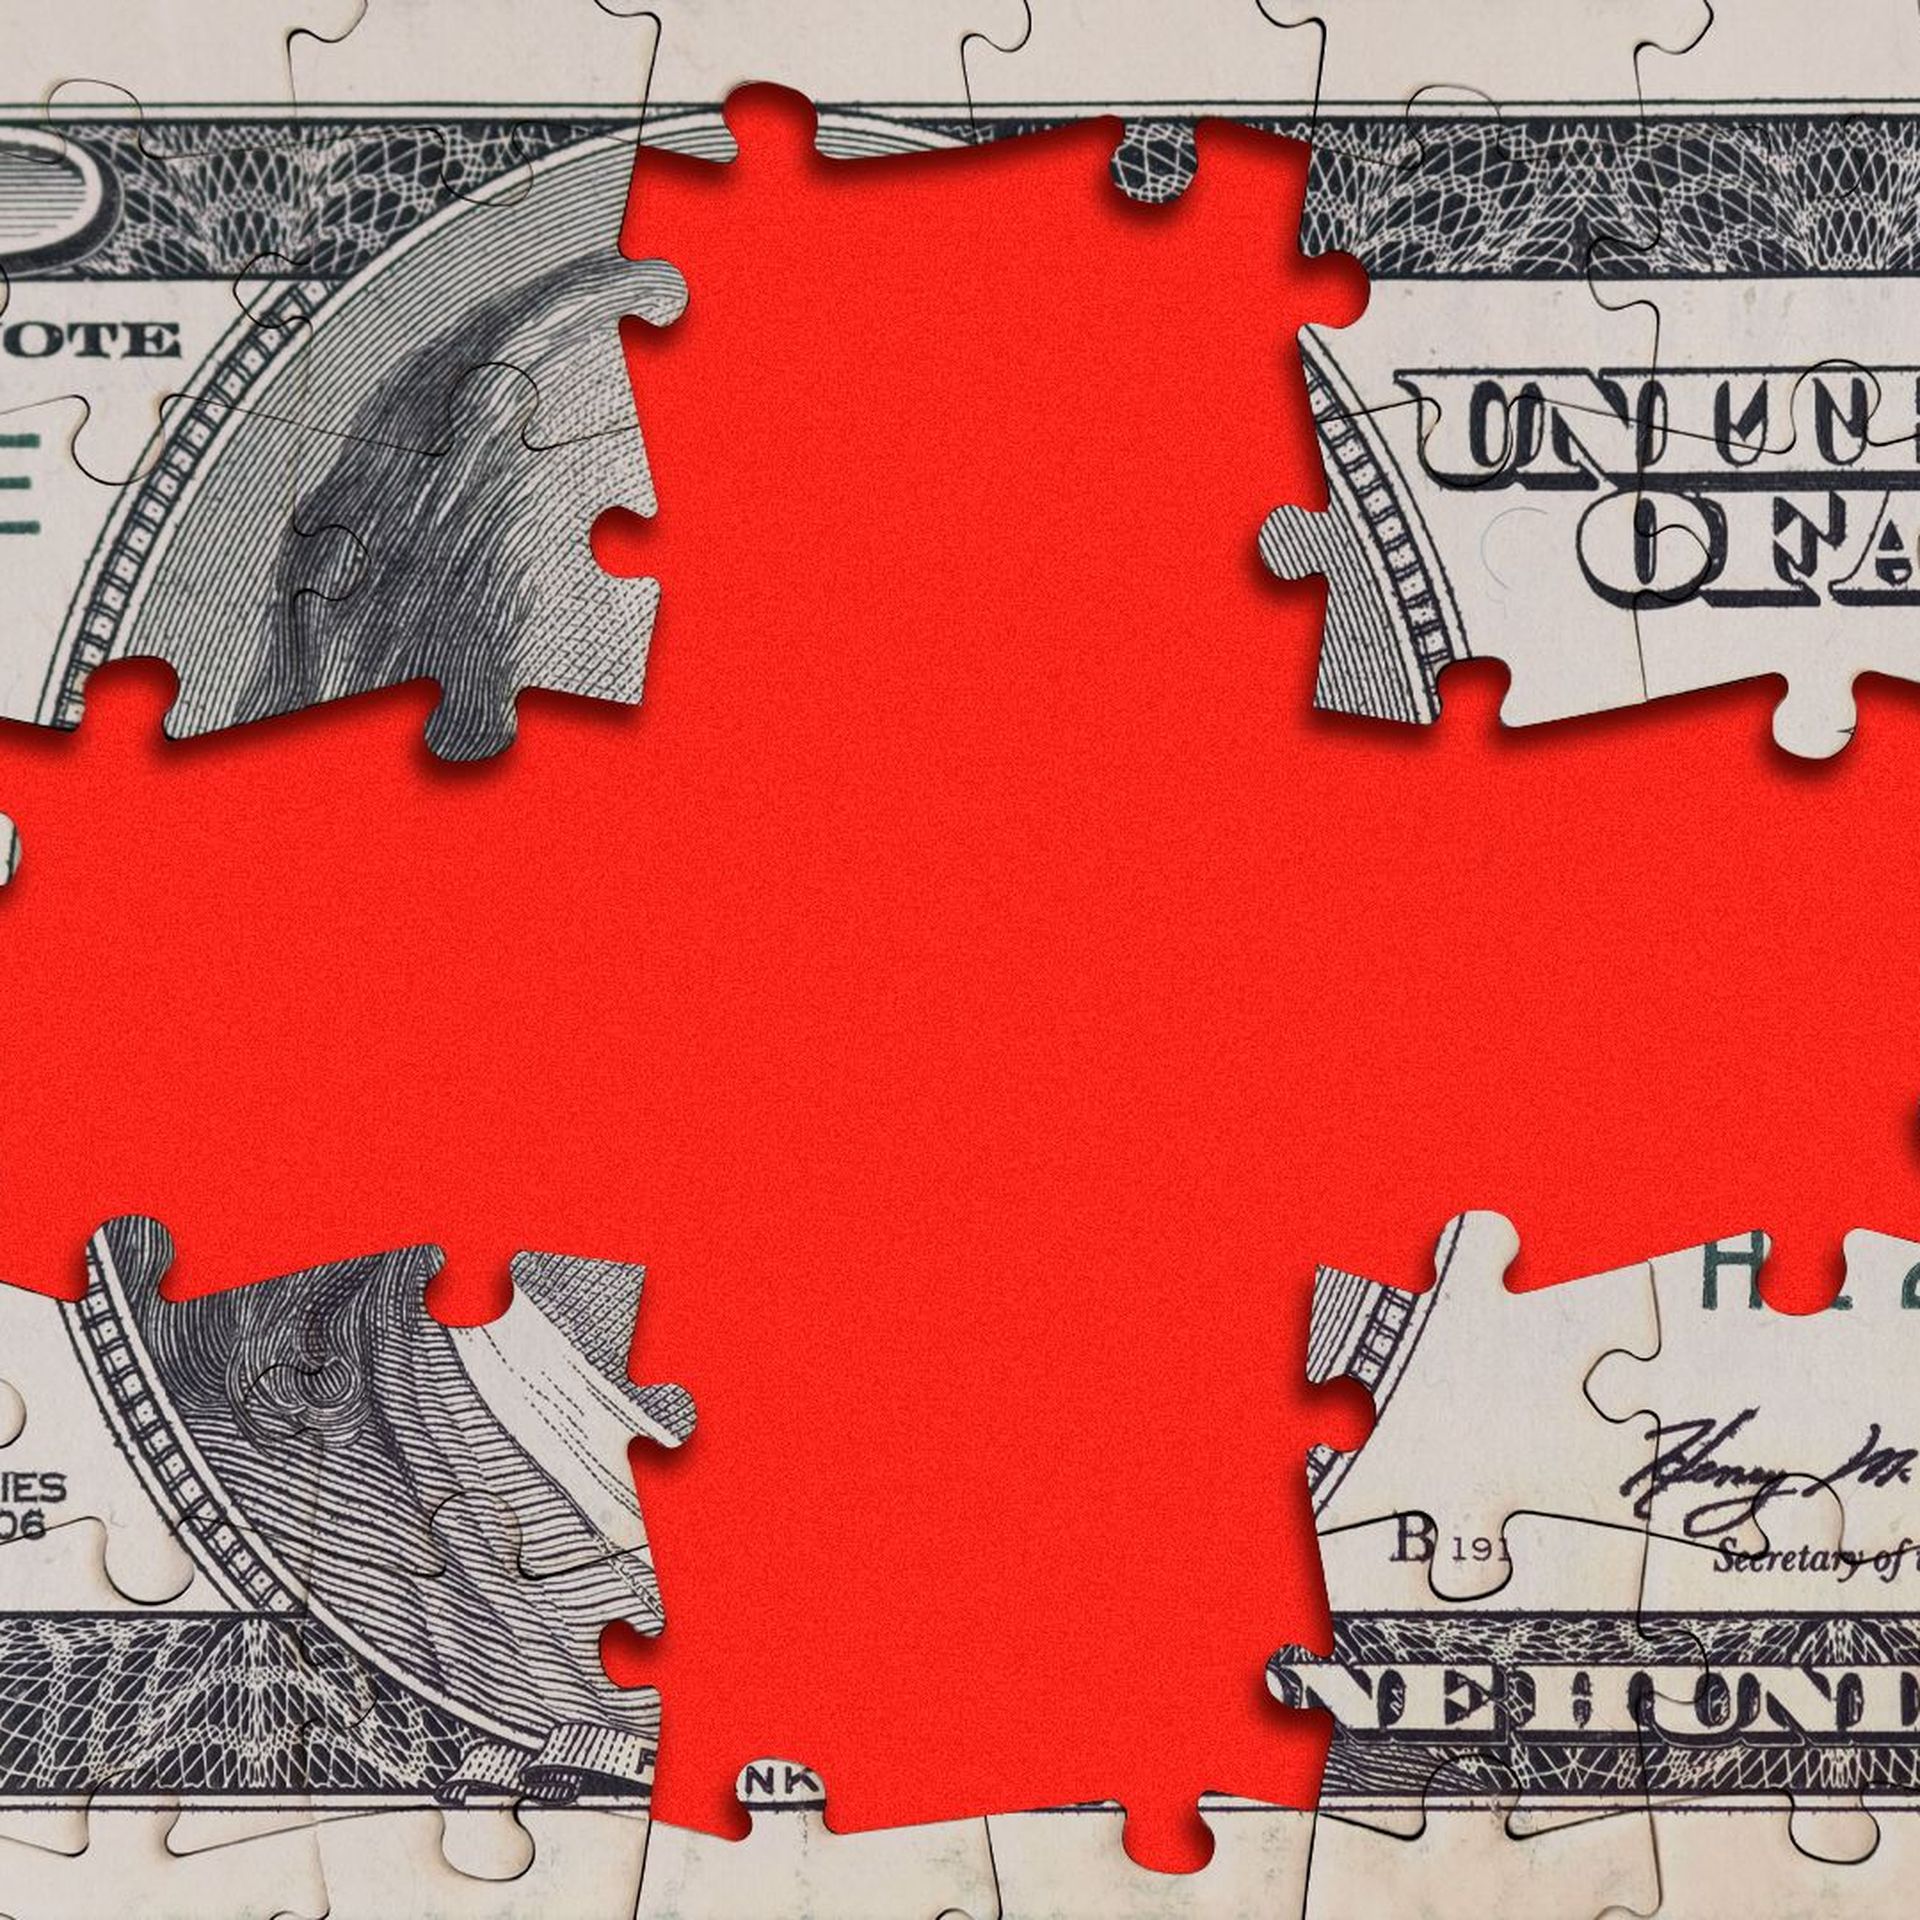 Illustration of a hundred dollar bill puzzle with pieces missing out of the center in the shape of a red cross